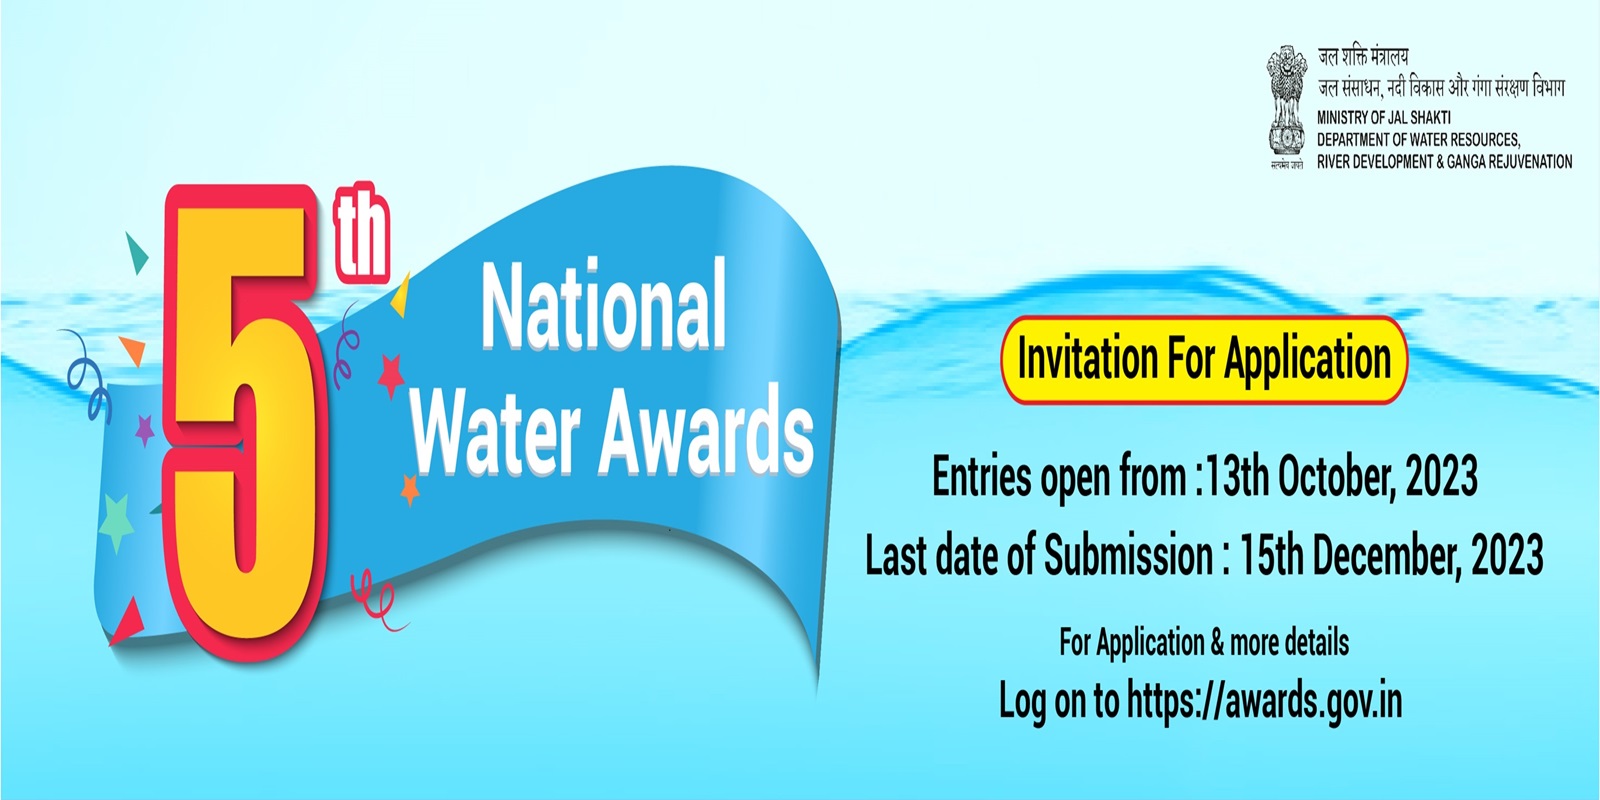 5th NATIONAL WATER AWARDS, 2023